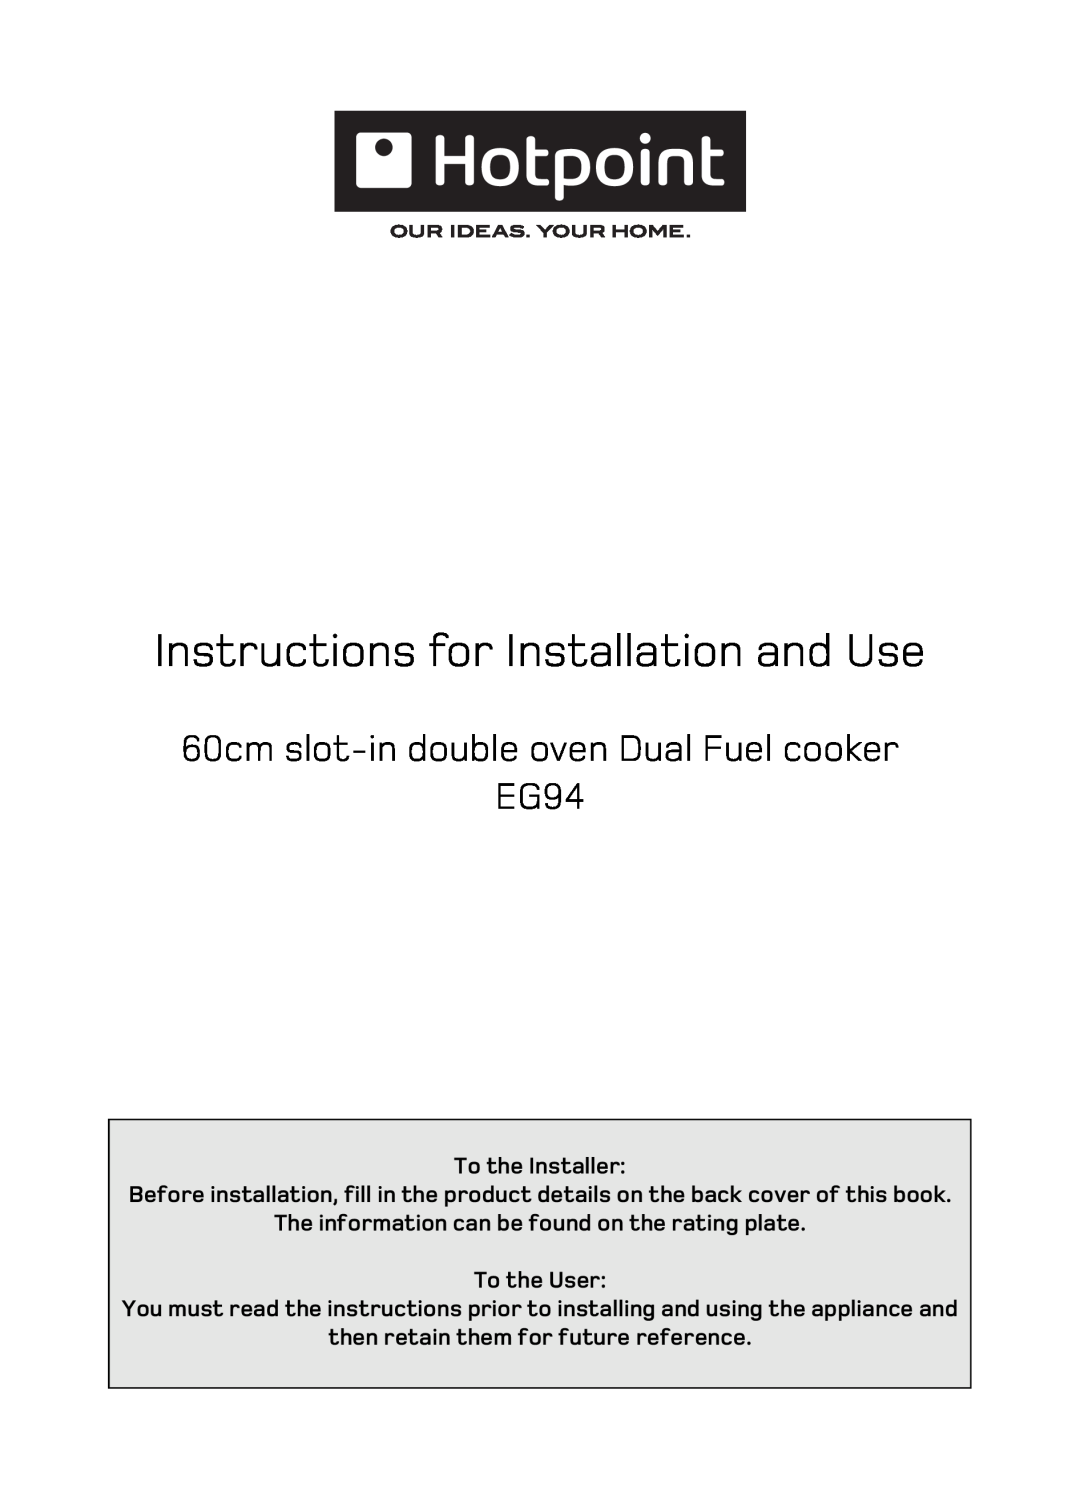 Hotpoint EG94 manual To the Installer, The information can be found on the rating plate To the User 